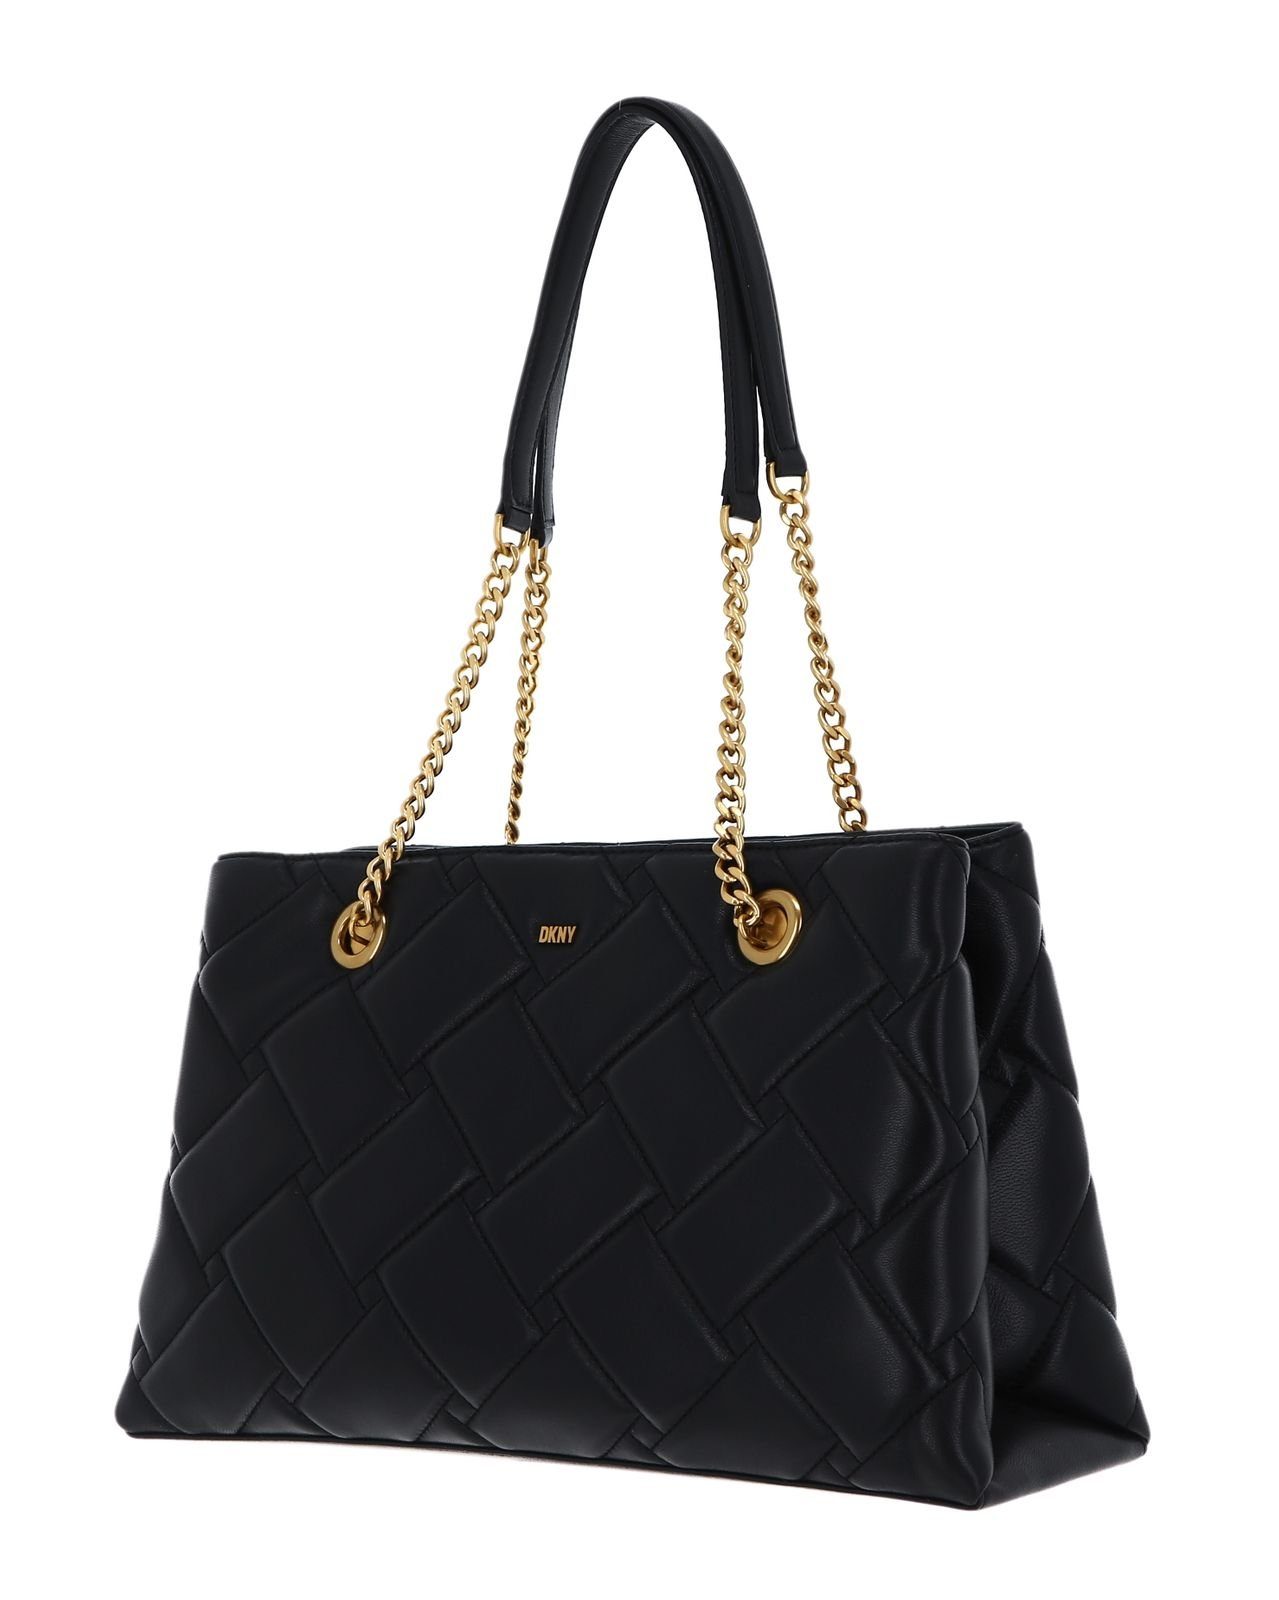 DKNY Schultertasche Willow Leather Blk / Gold